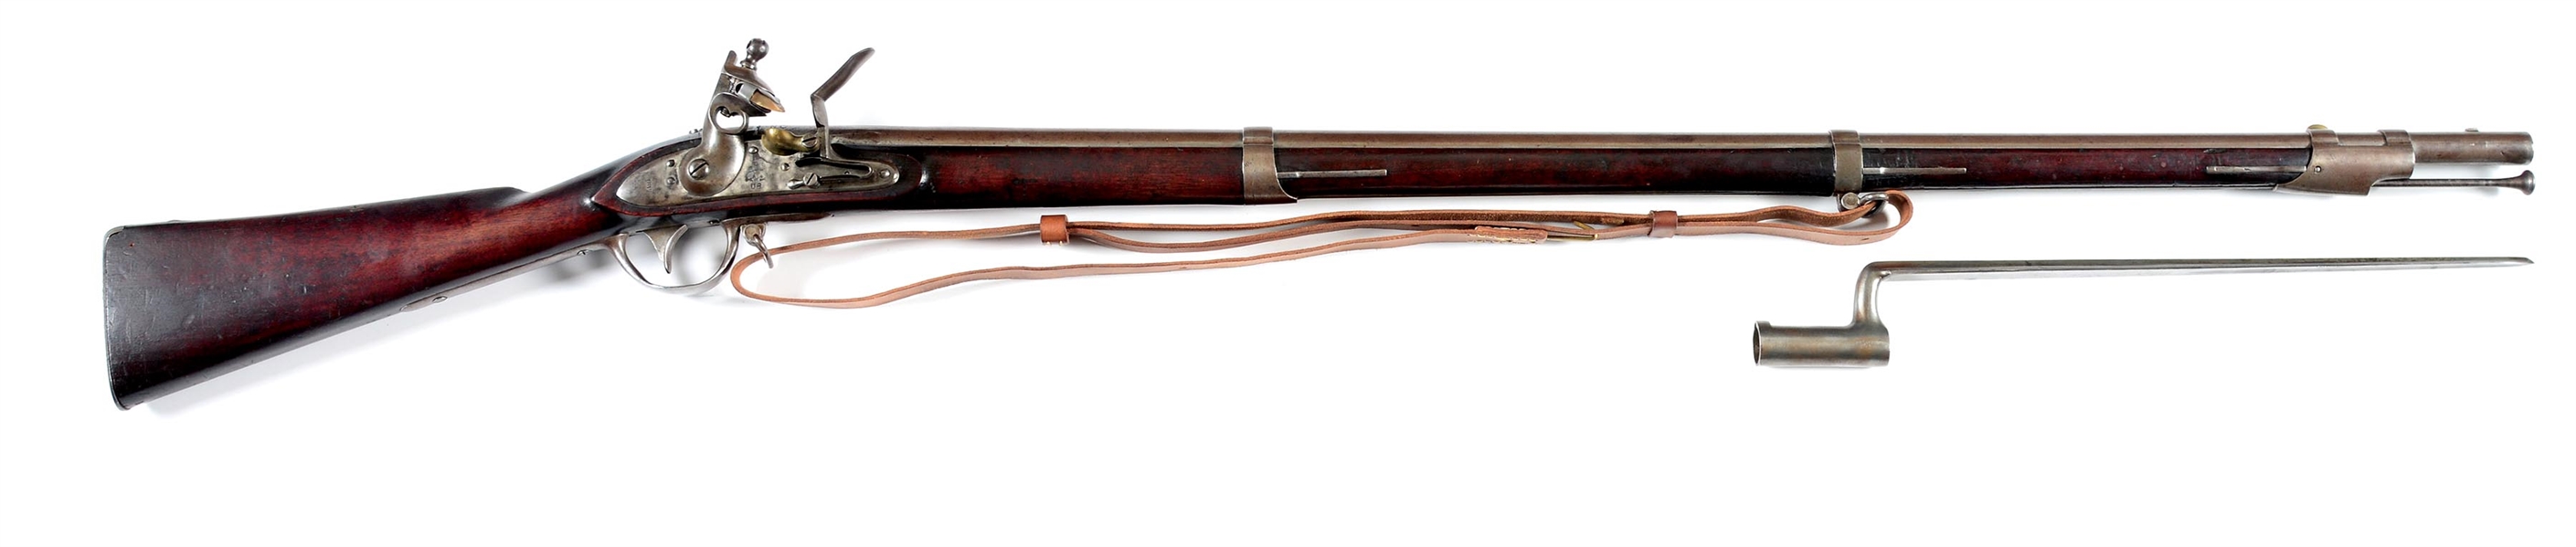 (A) US TRANSITIONAL M1816 NORTH CAROLINA MARKED FLINTLOCK MUSKET FROM THE MOLLER COLLECTION WITH BAYONET.